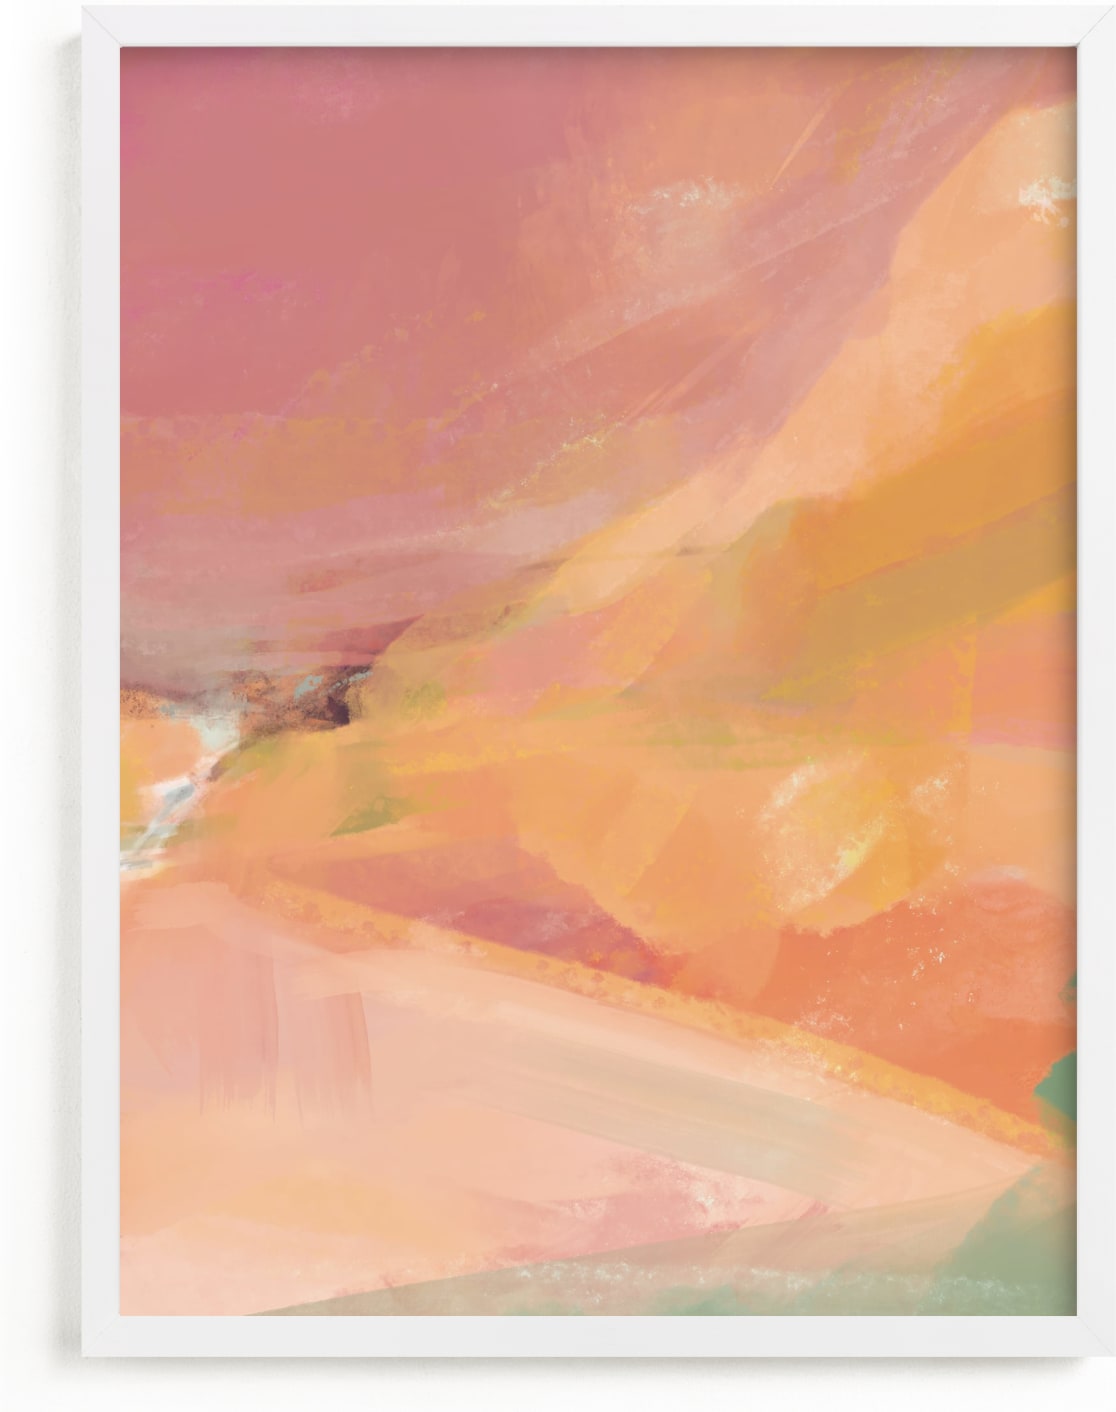 This is a beige, orange, rosegold art by Eric Ransom called Crevice II.